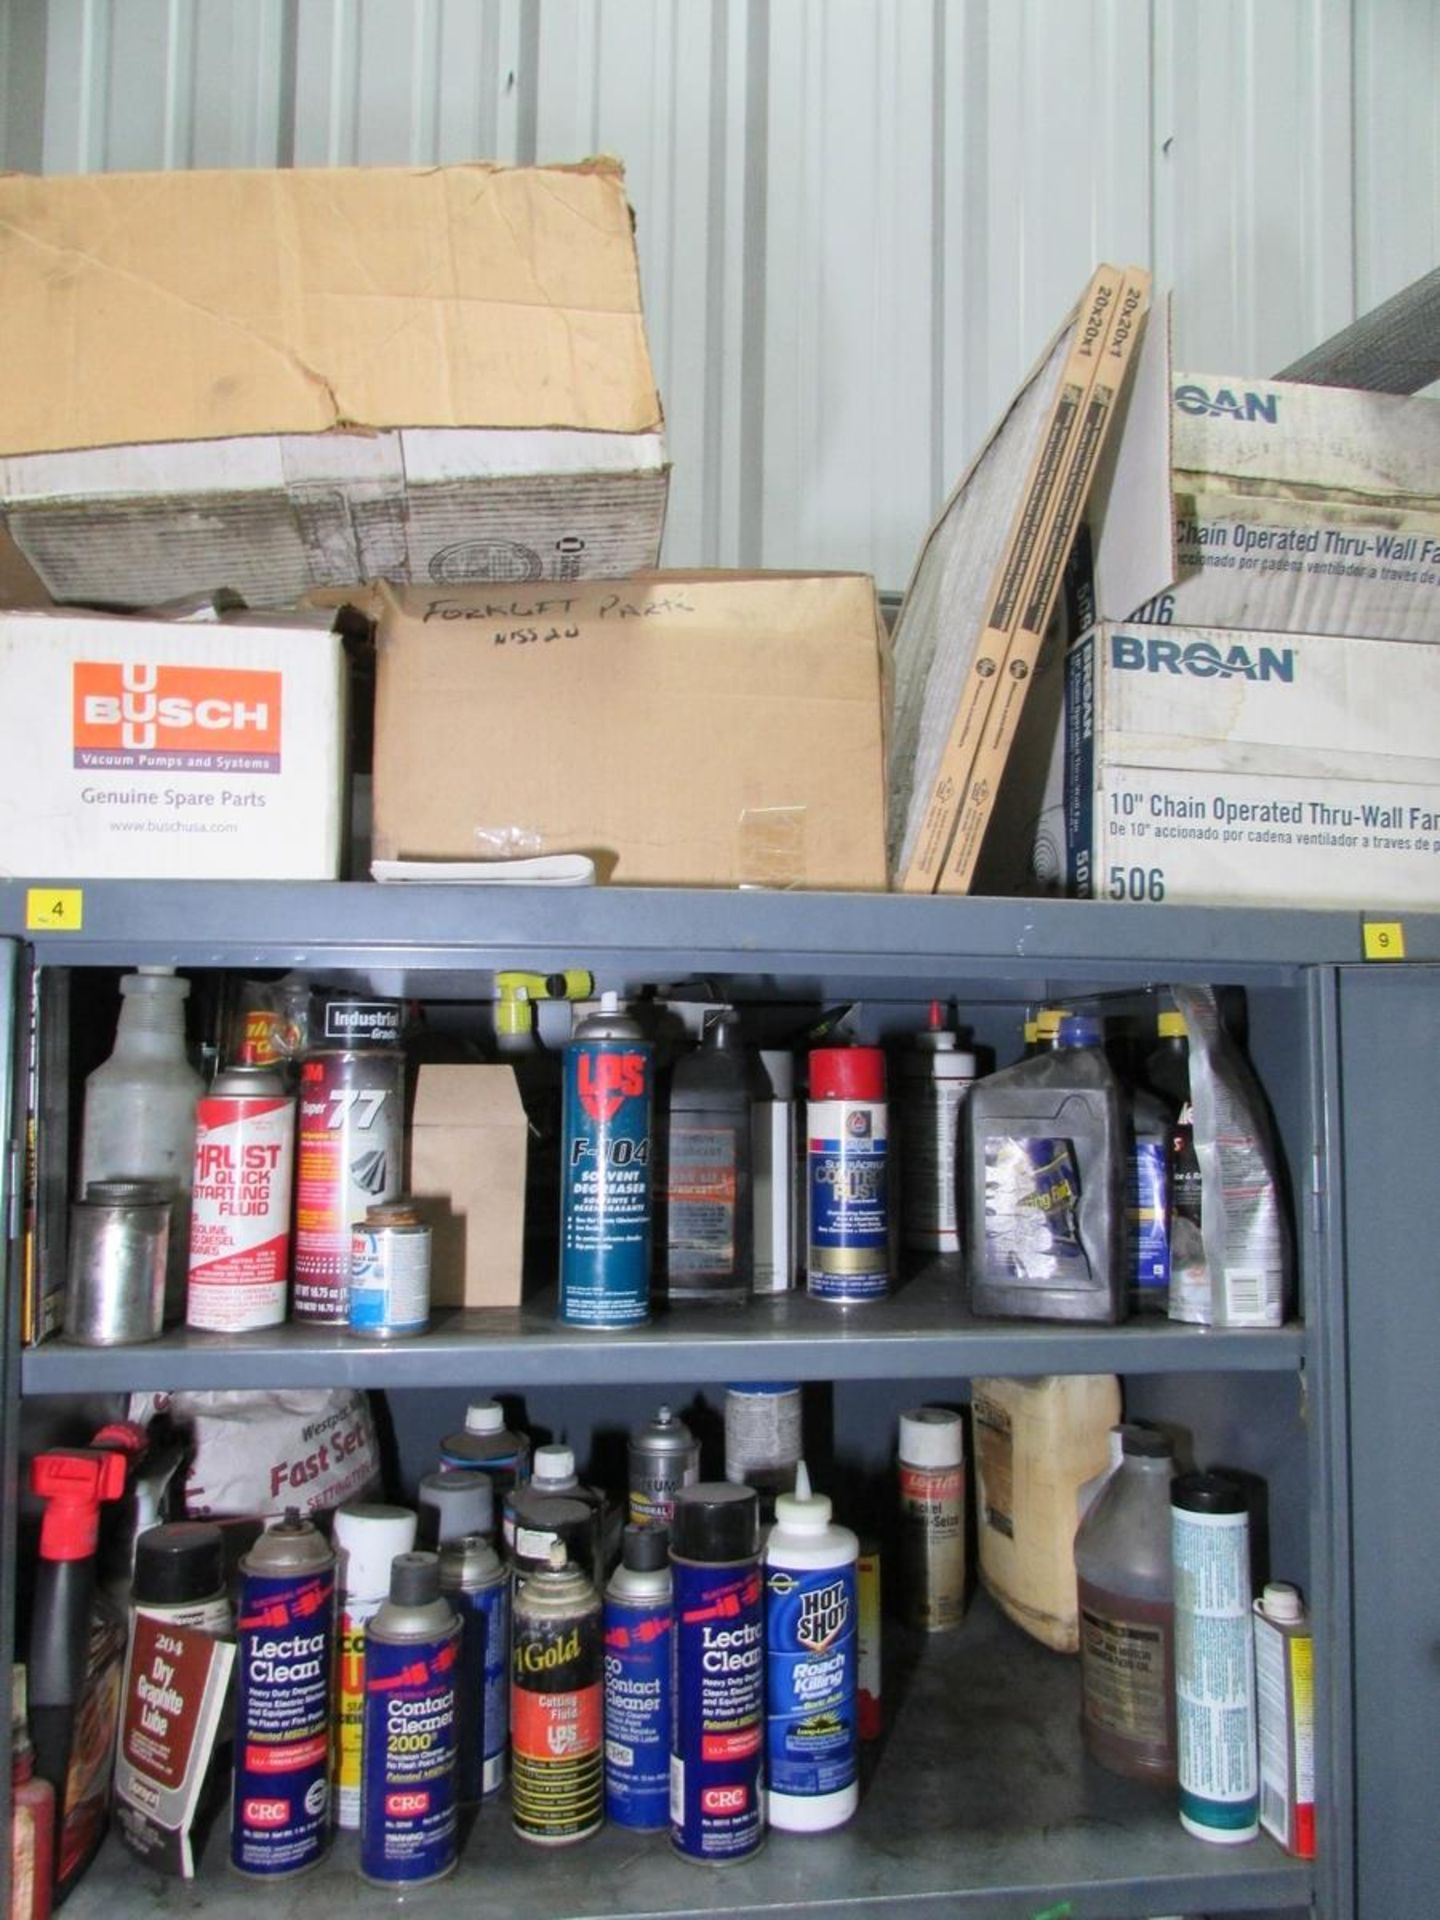 LOT - (2) 2-DOOR CABINETS, W/ CONTENTS: ASSORTED PAINT SUPPLIES, BATHROOM FACILITY PARTS, ETC. - Image 3 of 8